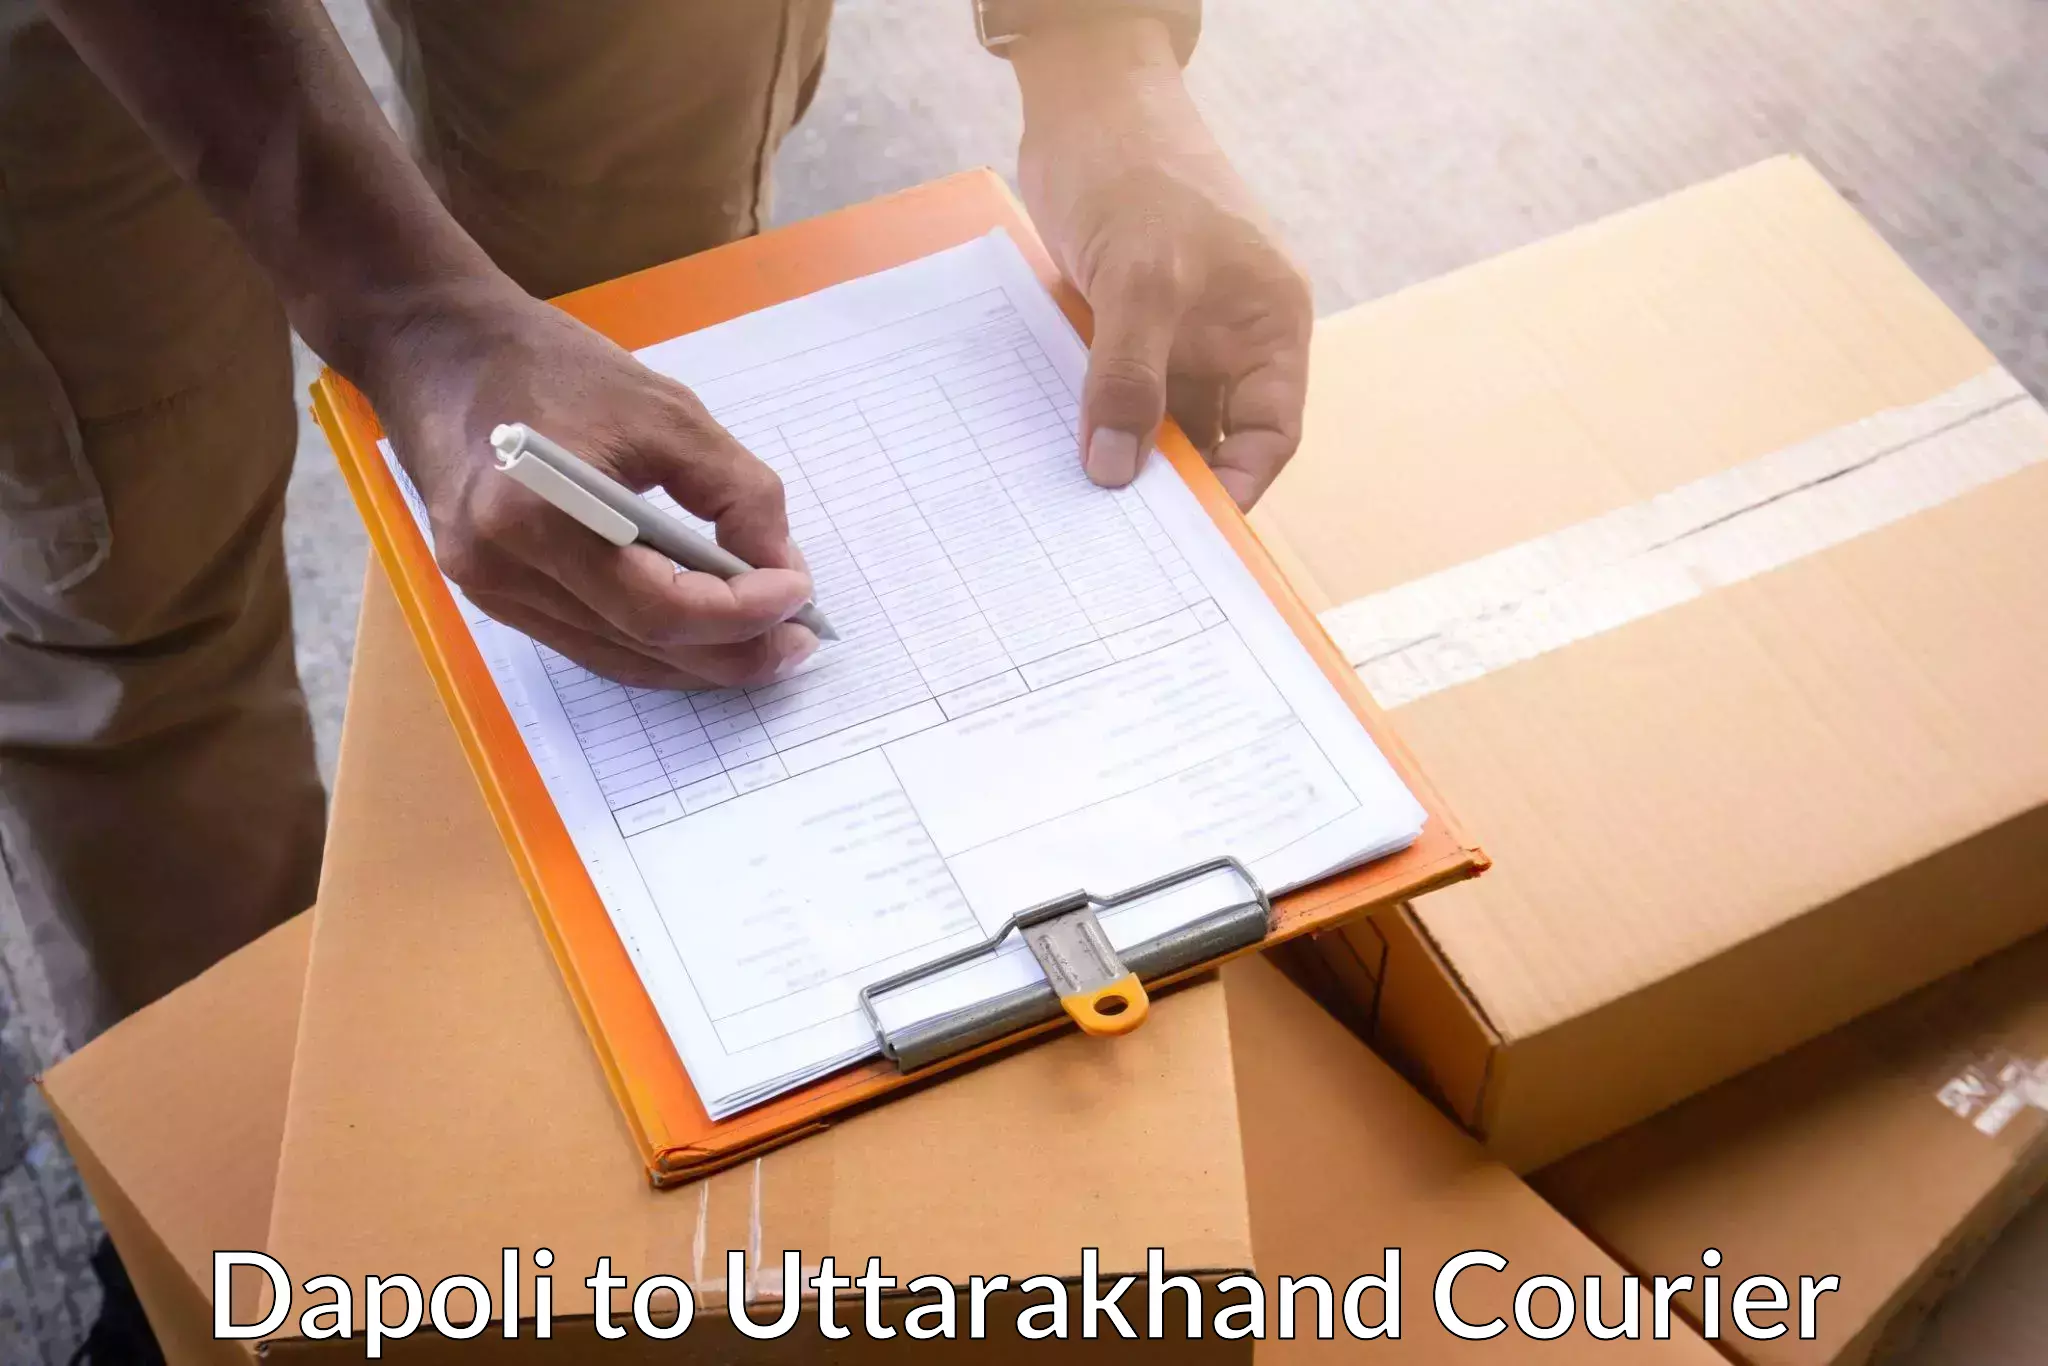 State-of-the-art courier technology in Dapoli to Rishikesh